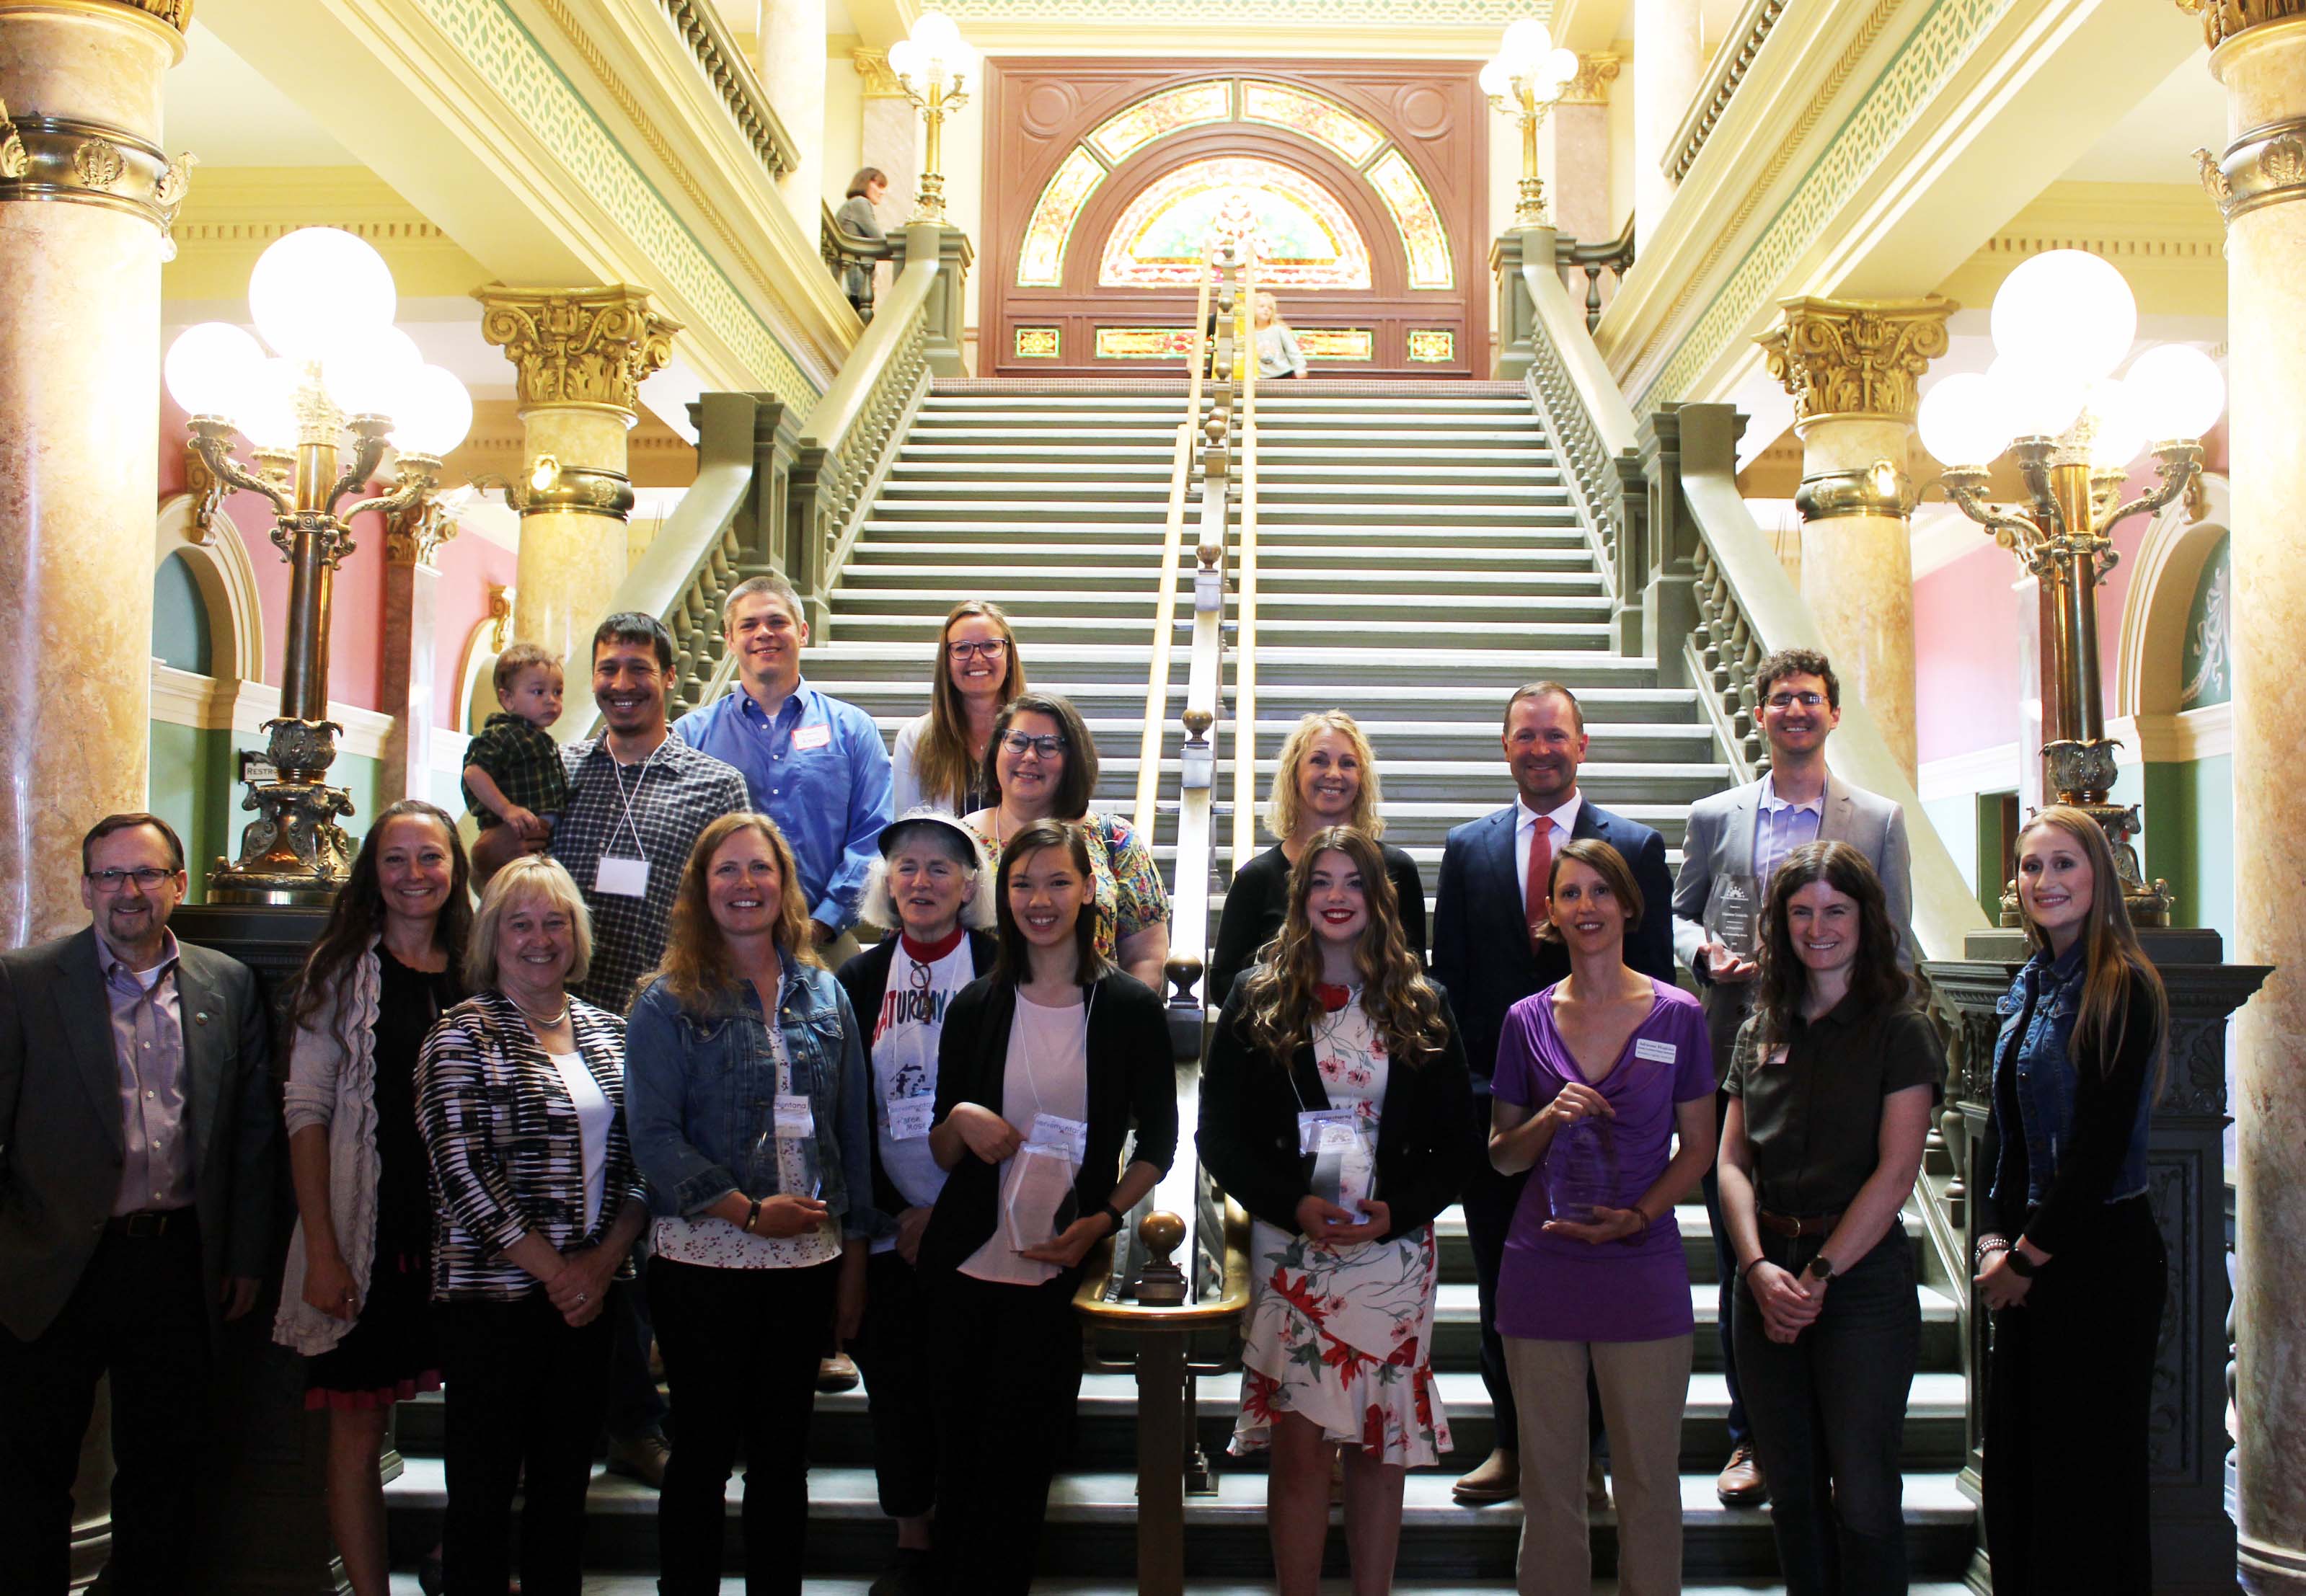 2023 ServeMontana Award winners and their nominators with Lieutenant Governor Juras, and members of the Commission on Community Service.